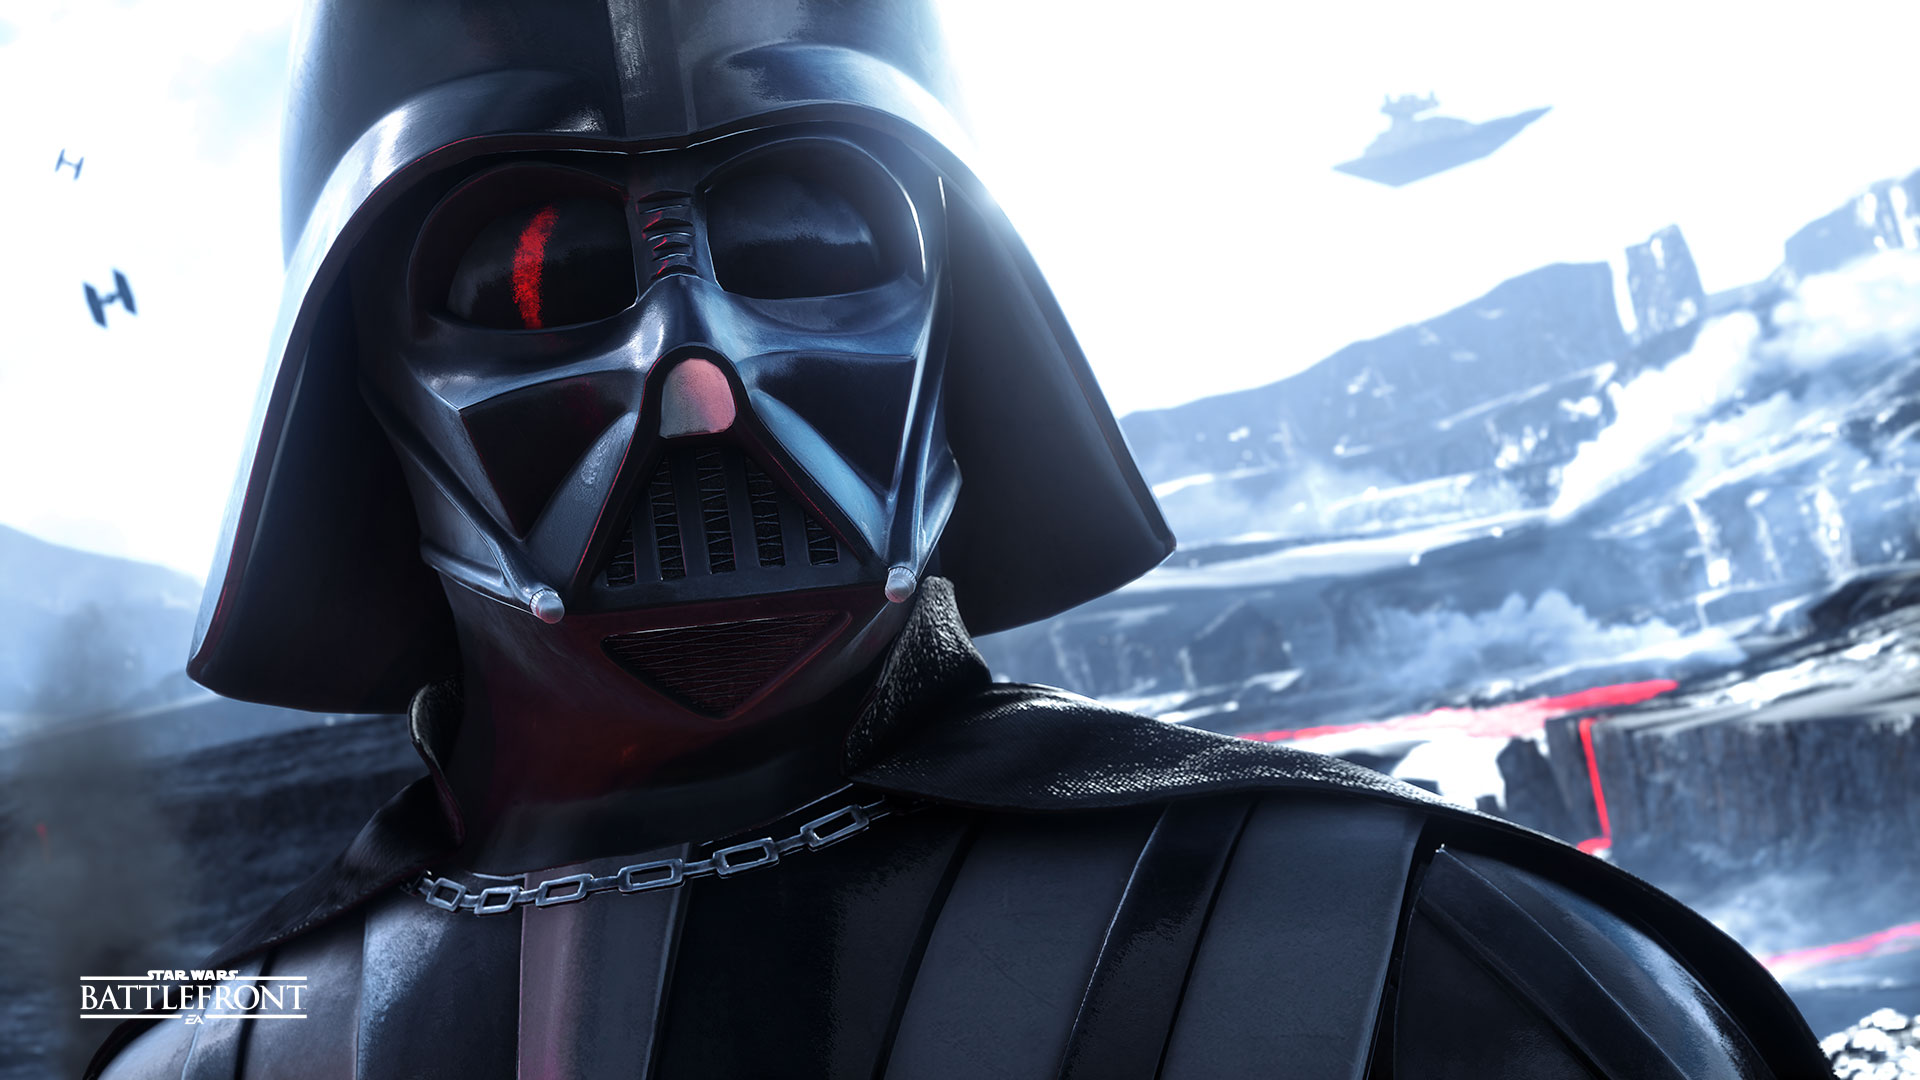 The alliance denies rumors of the Star Wars game

